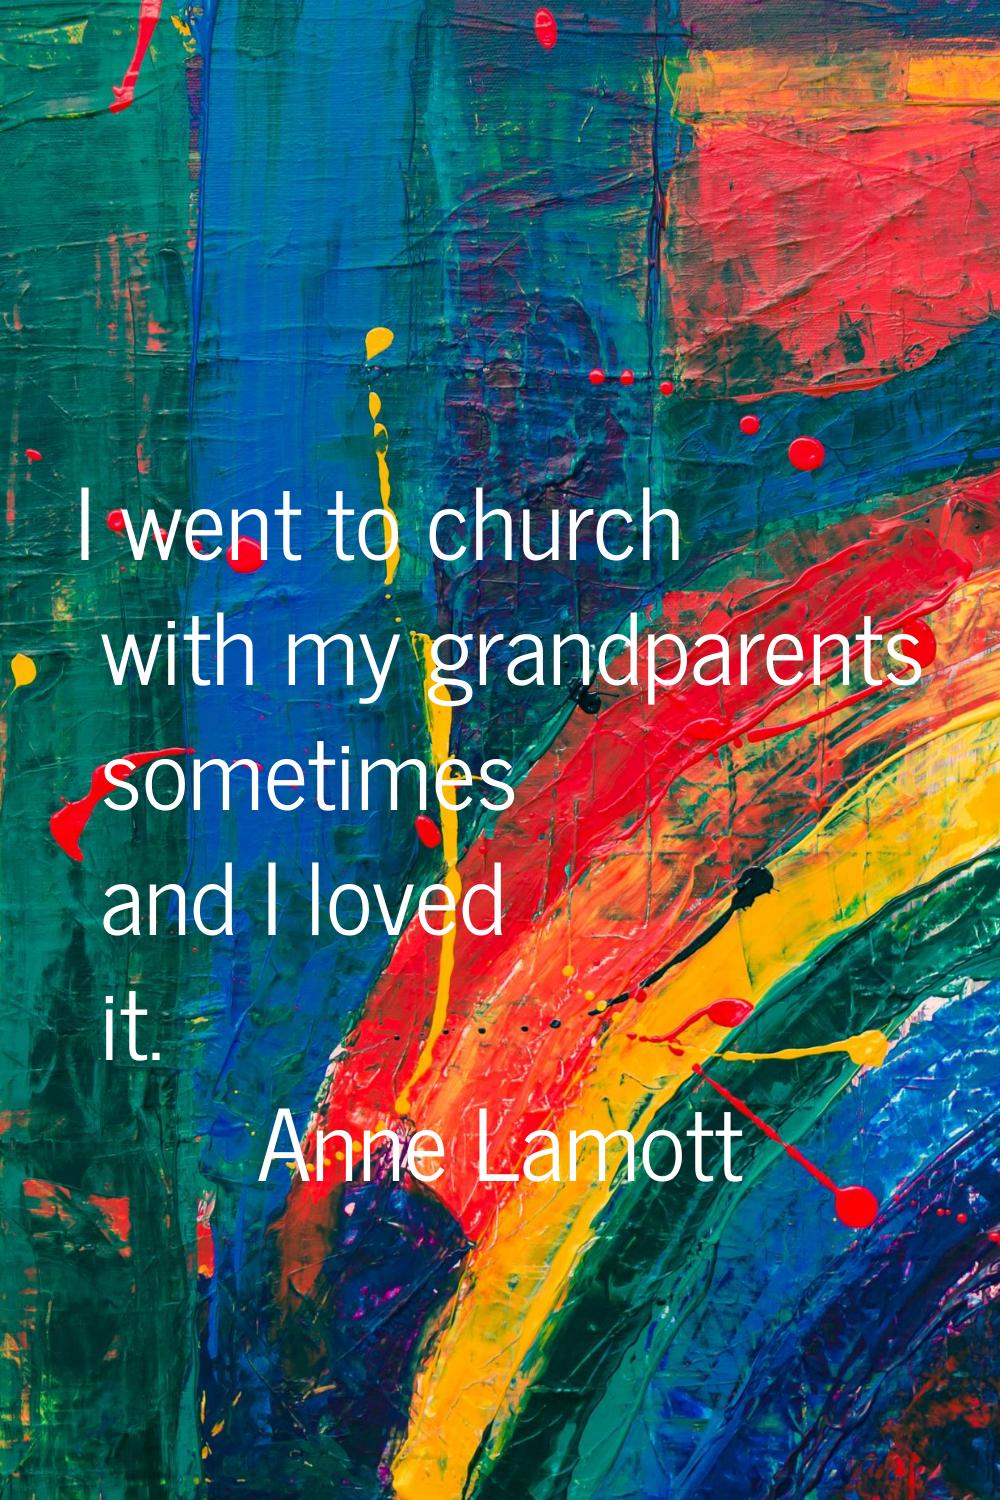 I went to church with my grandparents sometimes and I loved it.